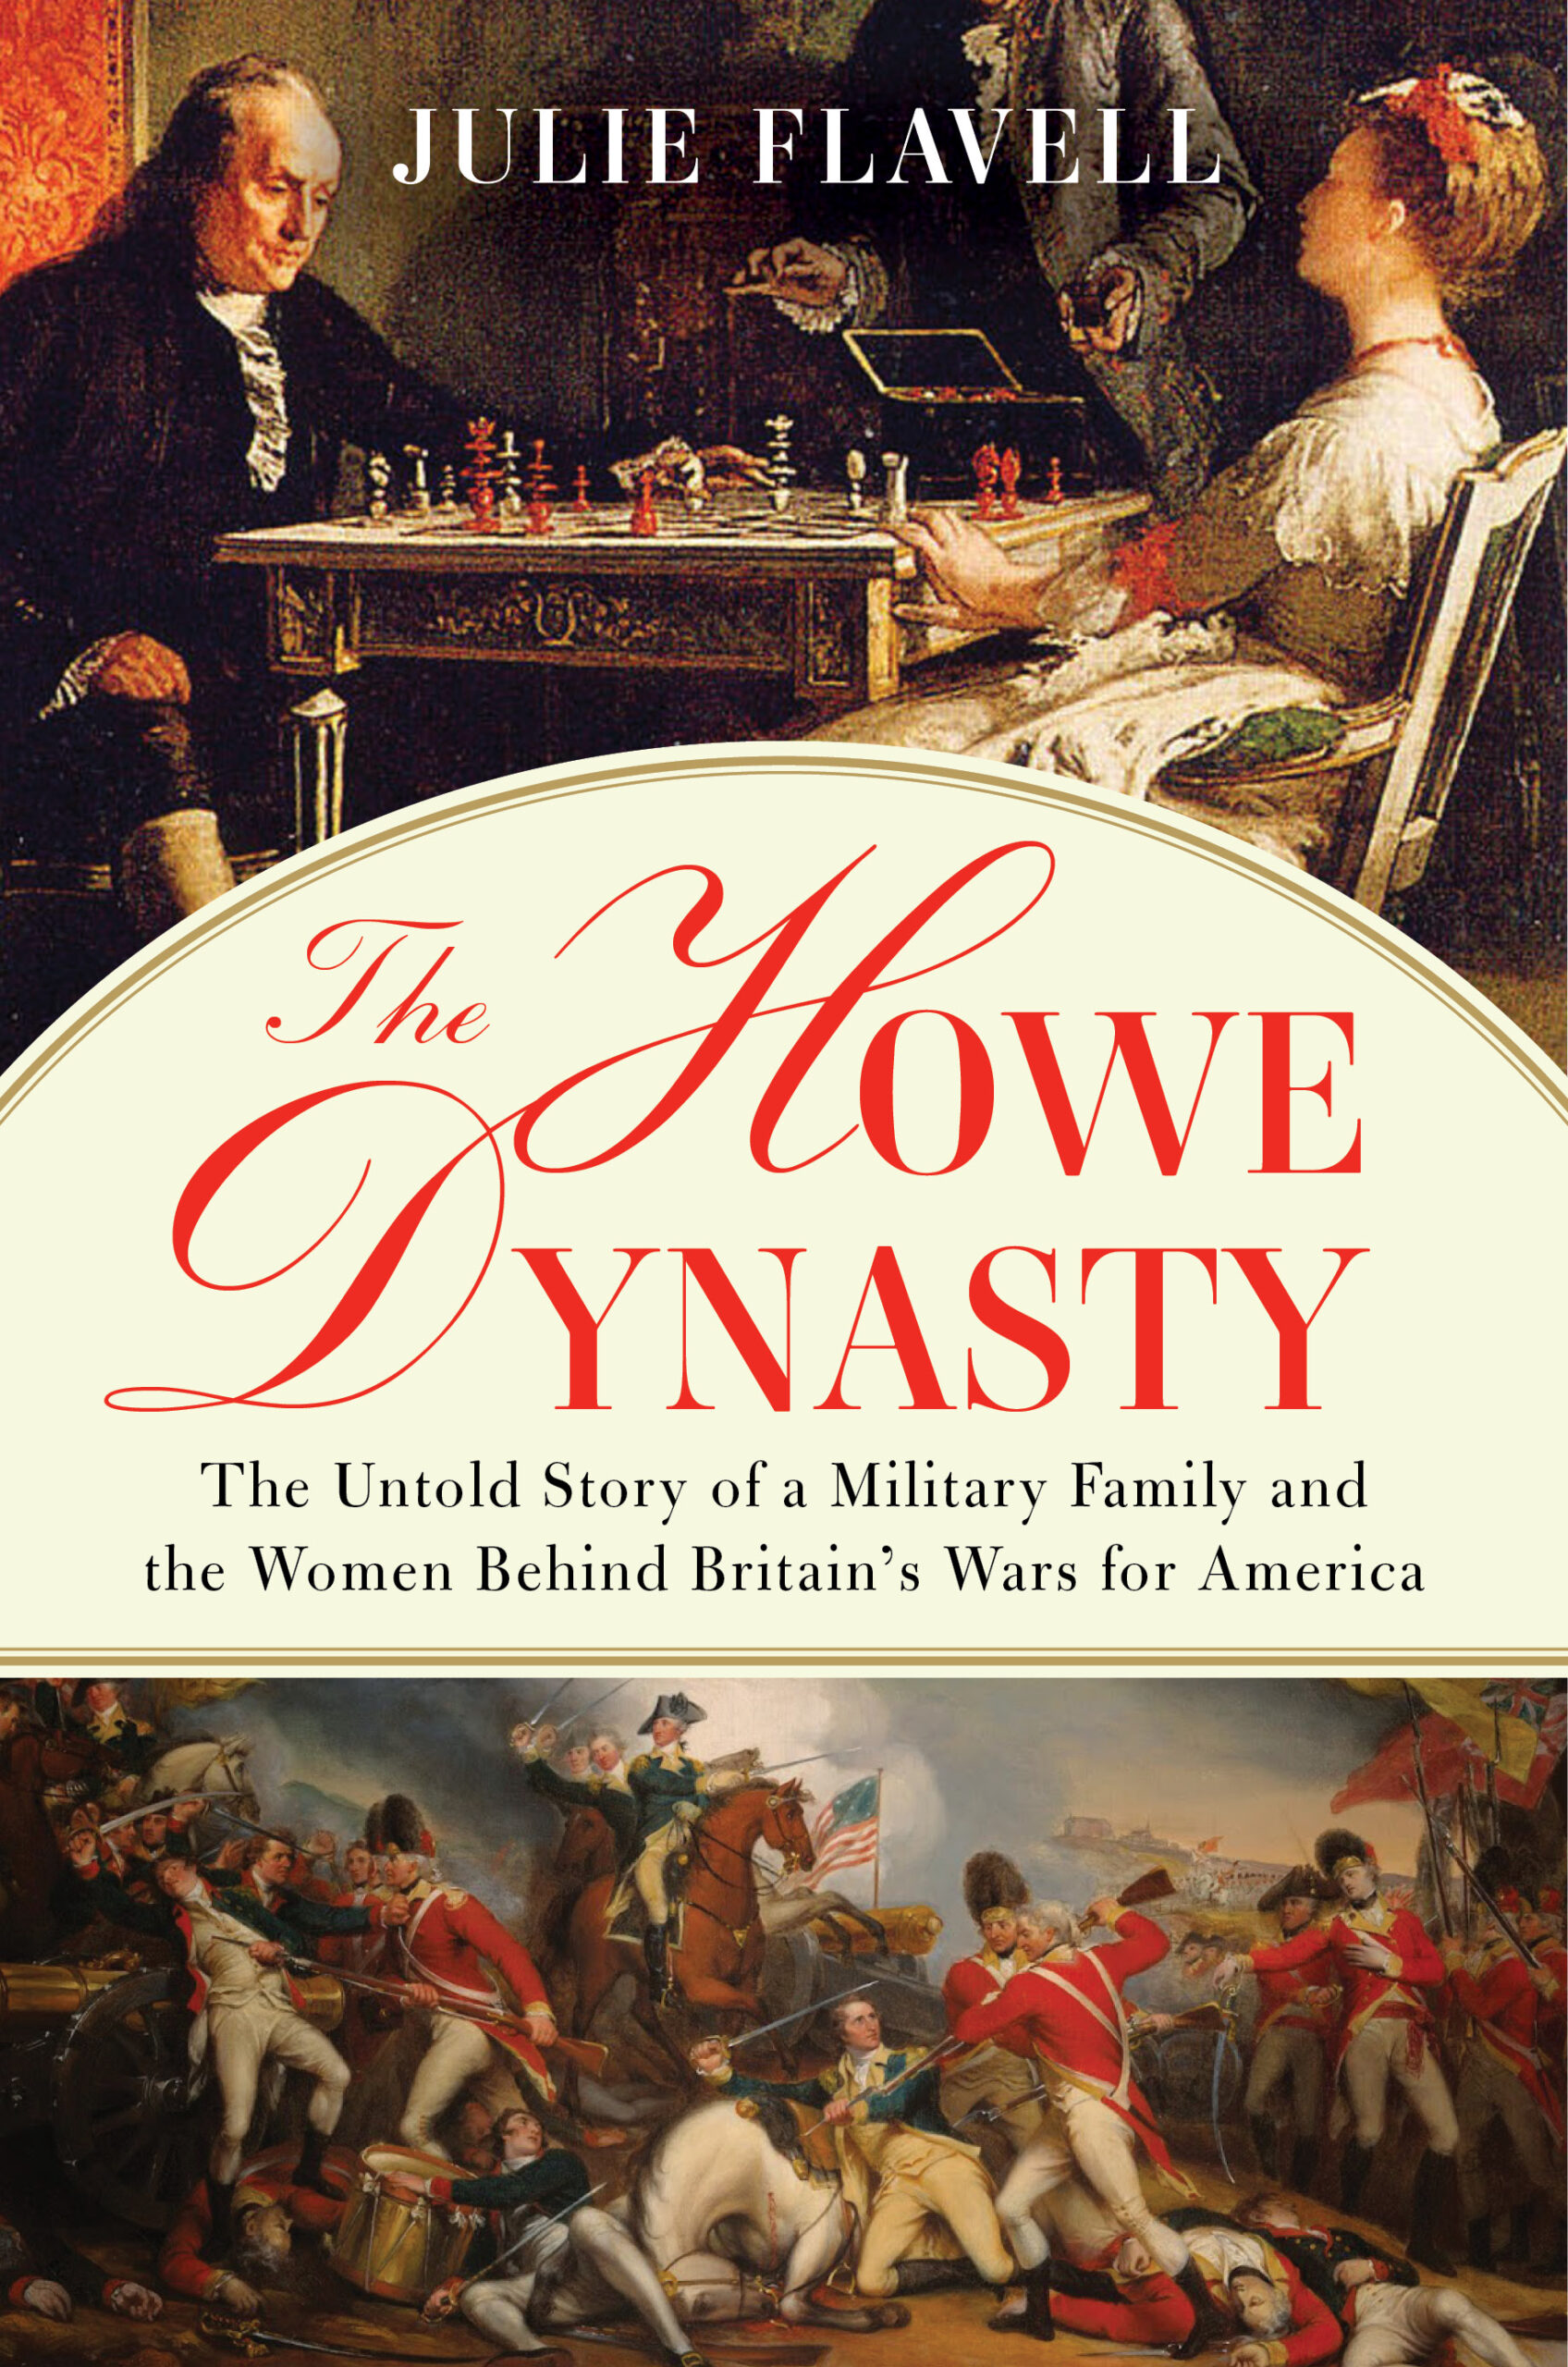 Julie Flavell, "The Howe Dynasty: The untold Story of a Military family and the women behind Britain's Wars for America"